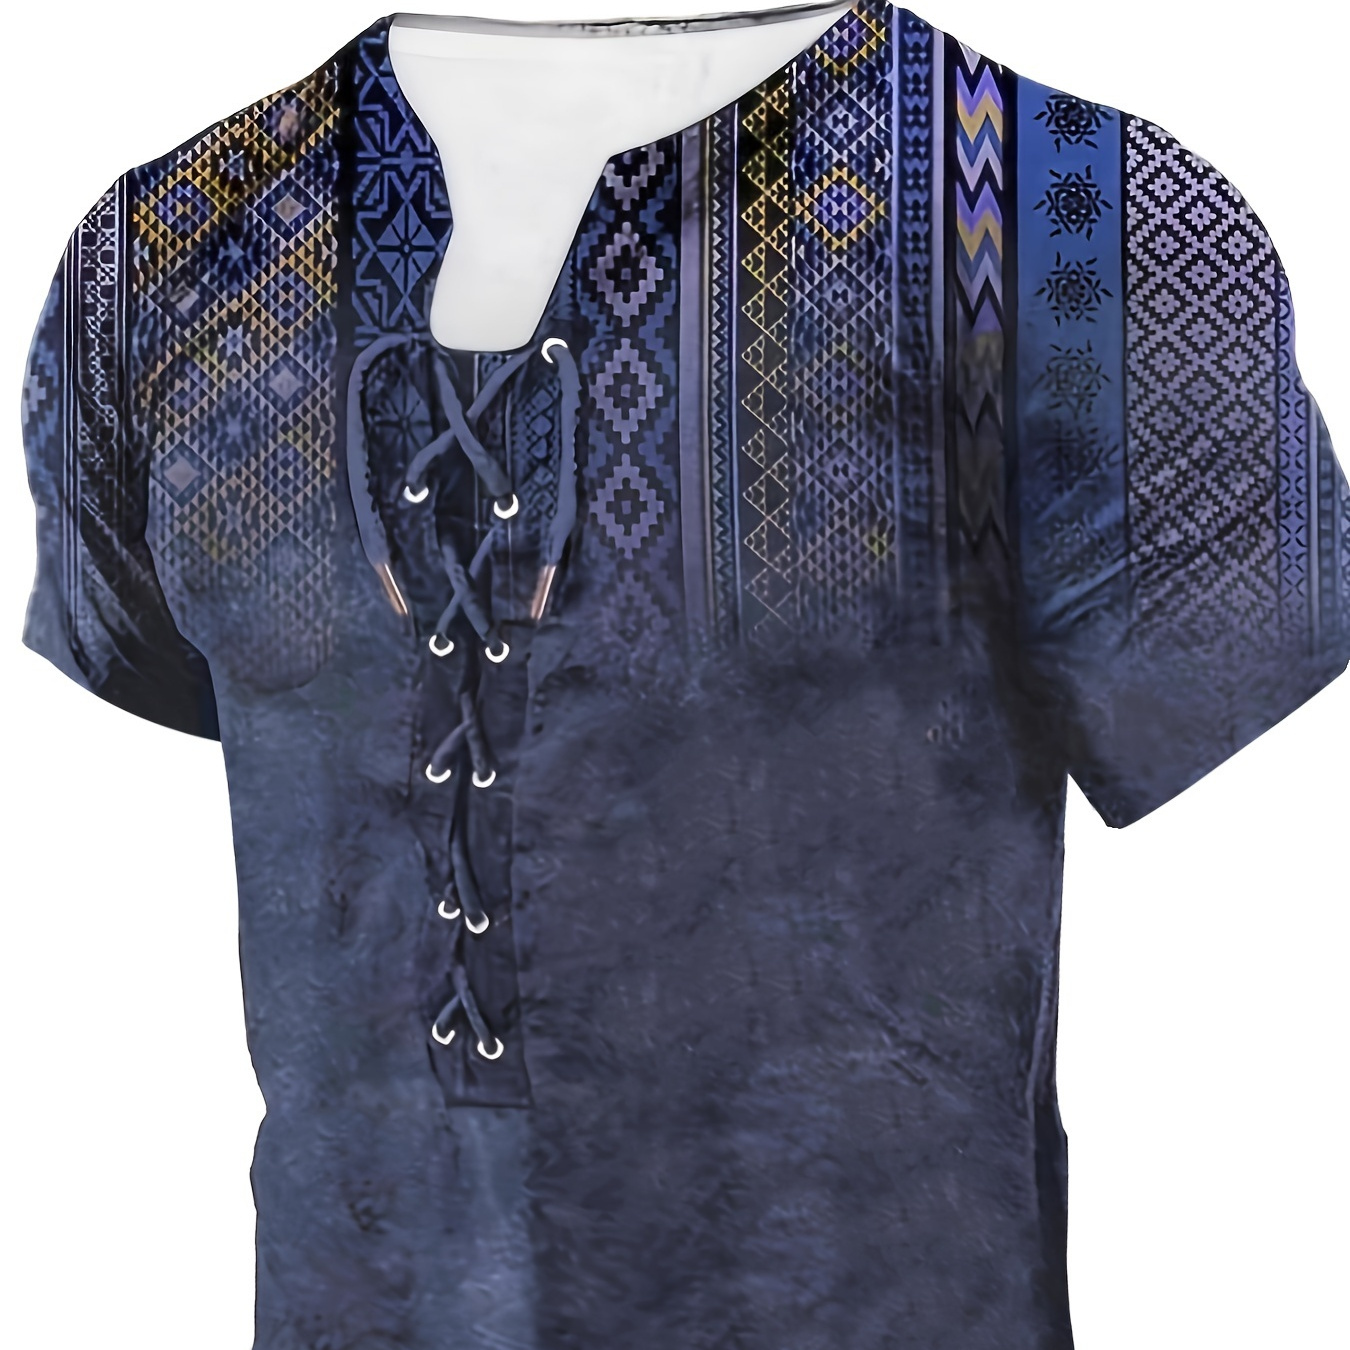 

Ethnic Style Graphic Pattern Men's Short Sleeve Henley Shirt With Zip Up, Chic And Stylish Tops For Summer Outdoors And Holiday Wear